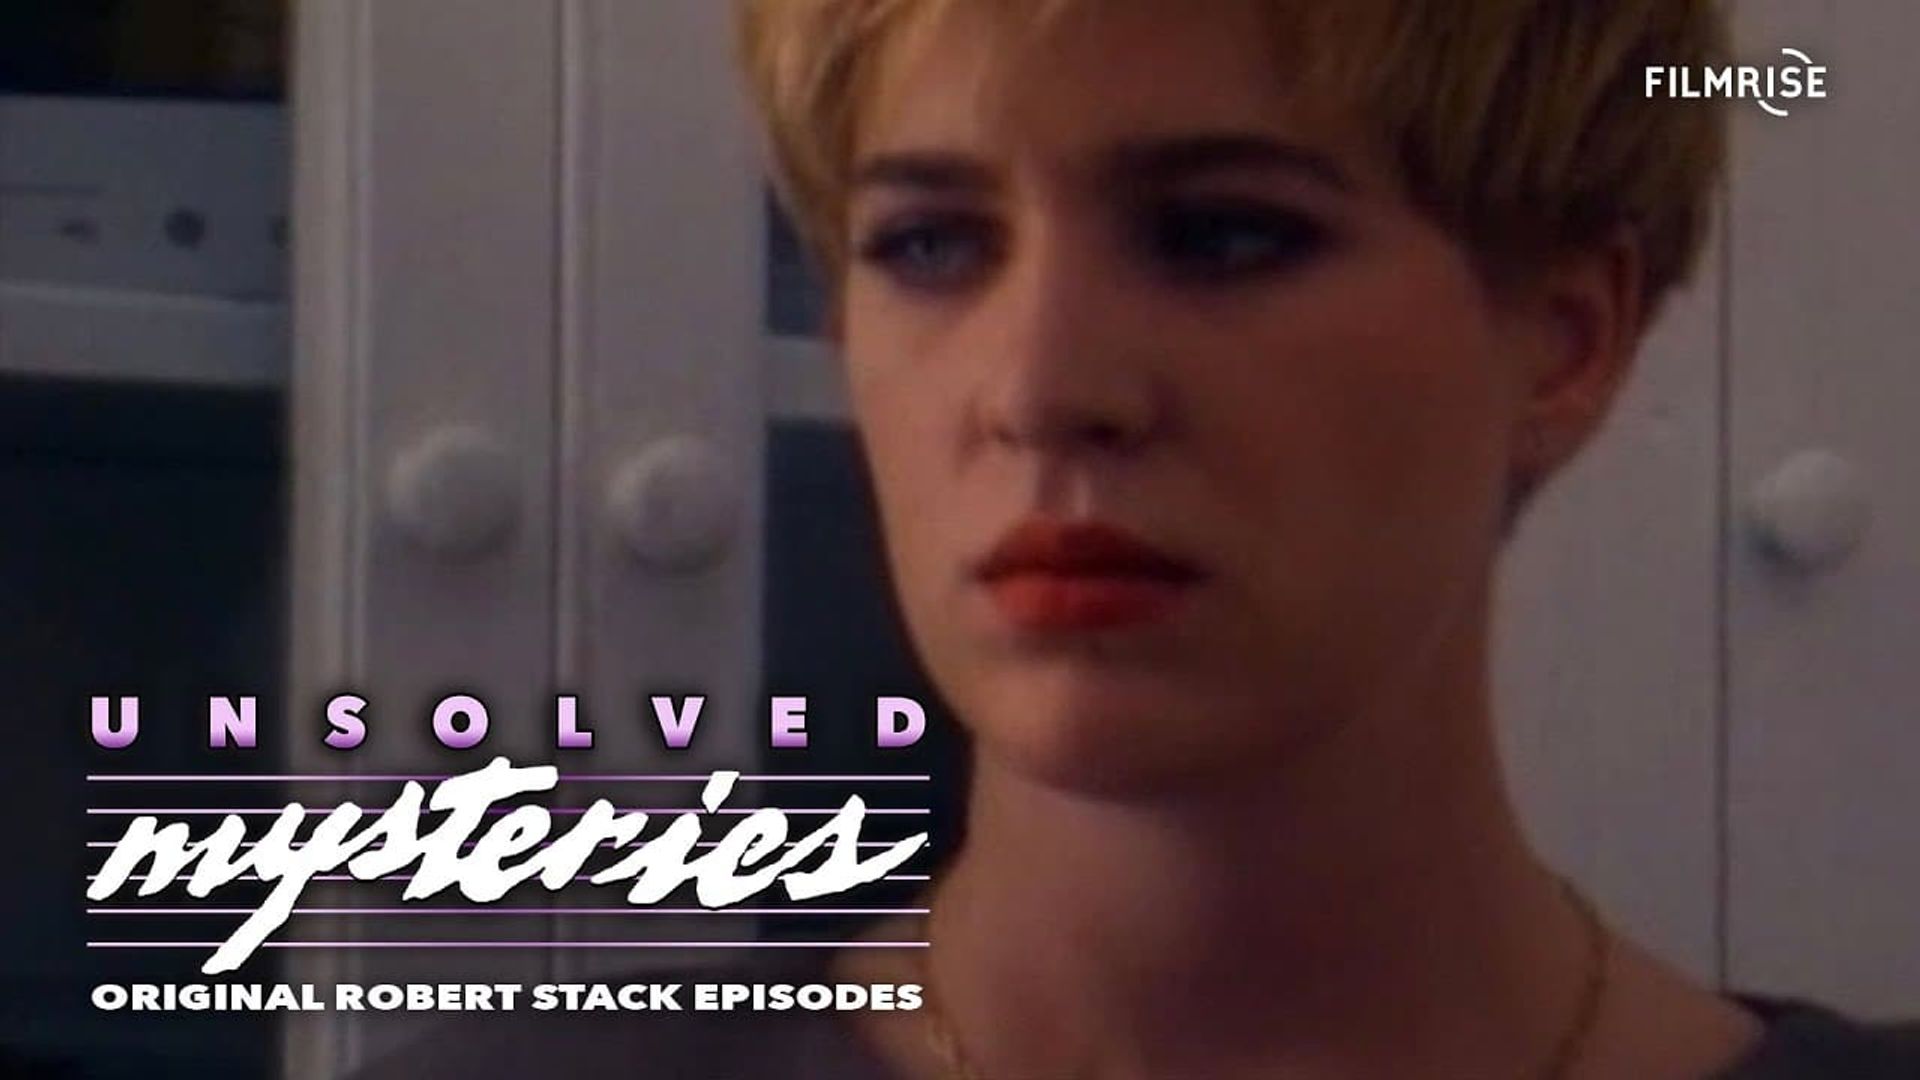 Unsolved Mysteries background